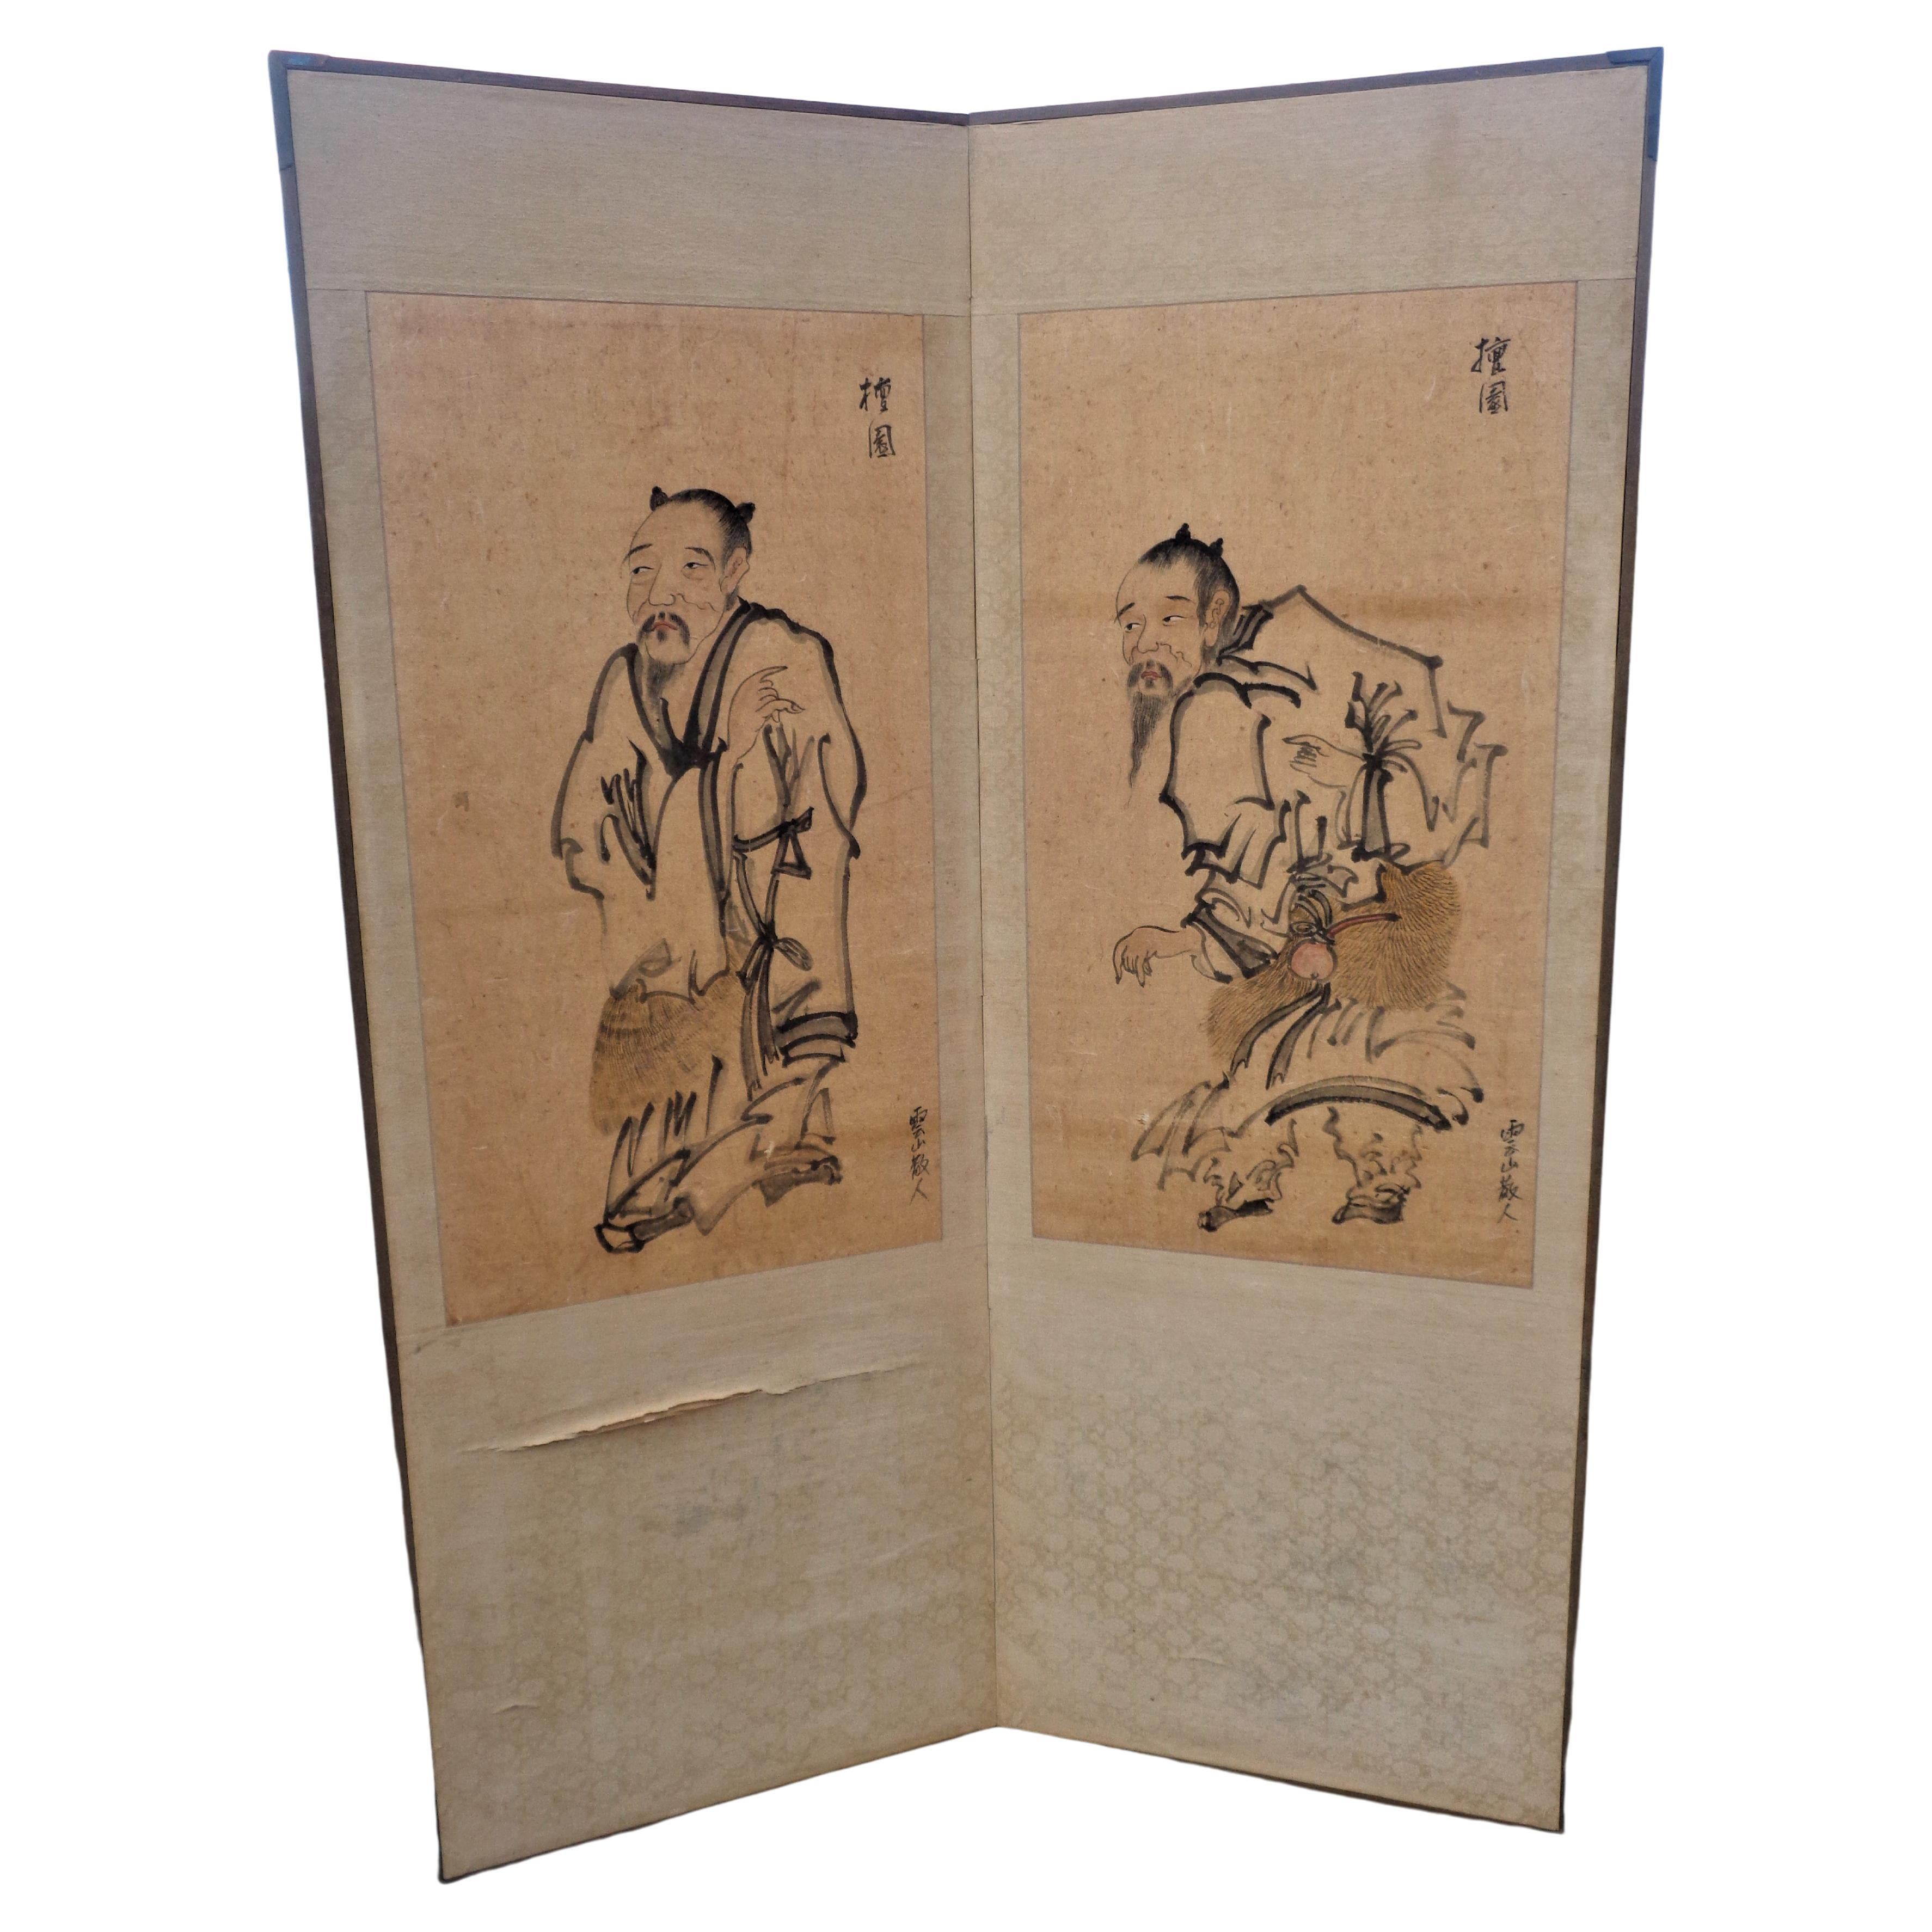 Antique 19th Century Chinese Ancestral Scroll Paintings Two Panel Folding Screen